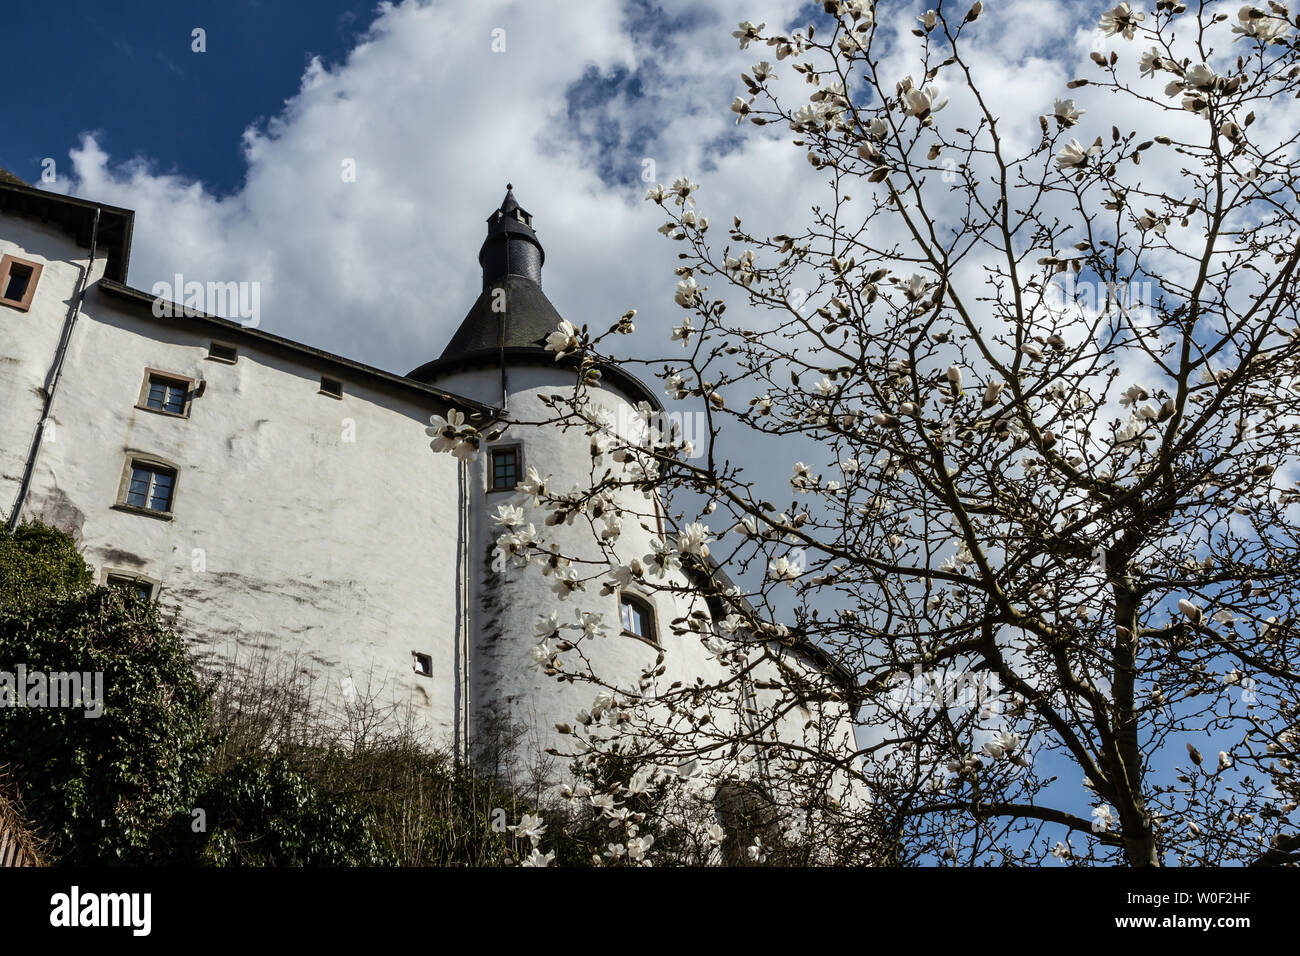 Medieval castle in Clervaux, Luxembourg Stock Photo